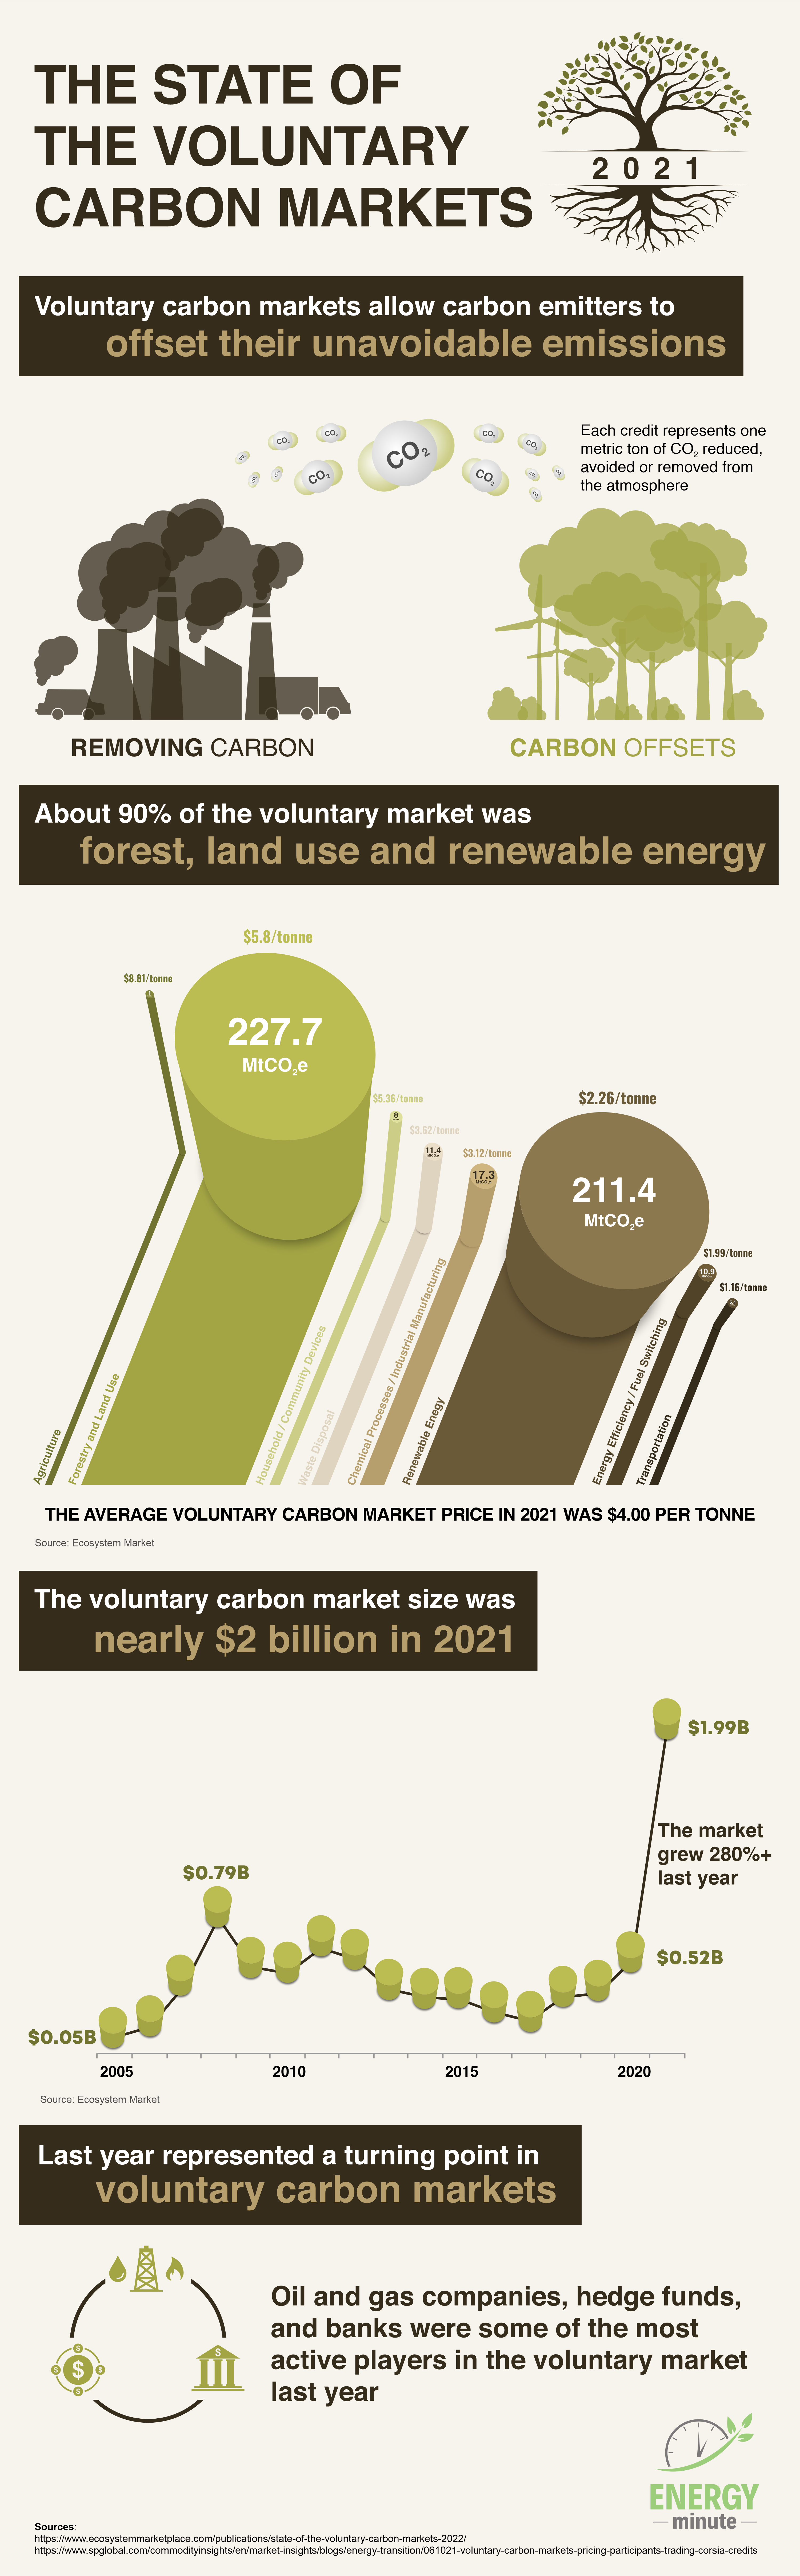 The States of Voluntary Carbon Markets in 2023